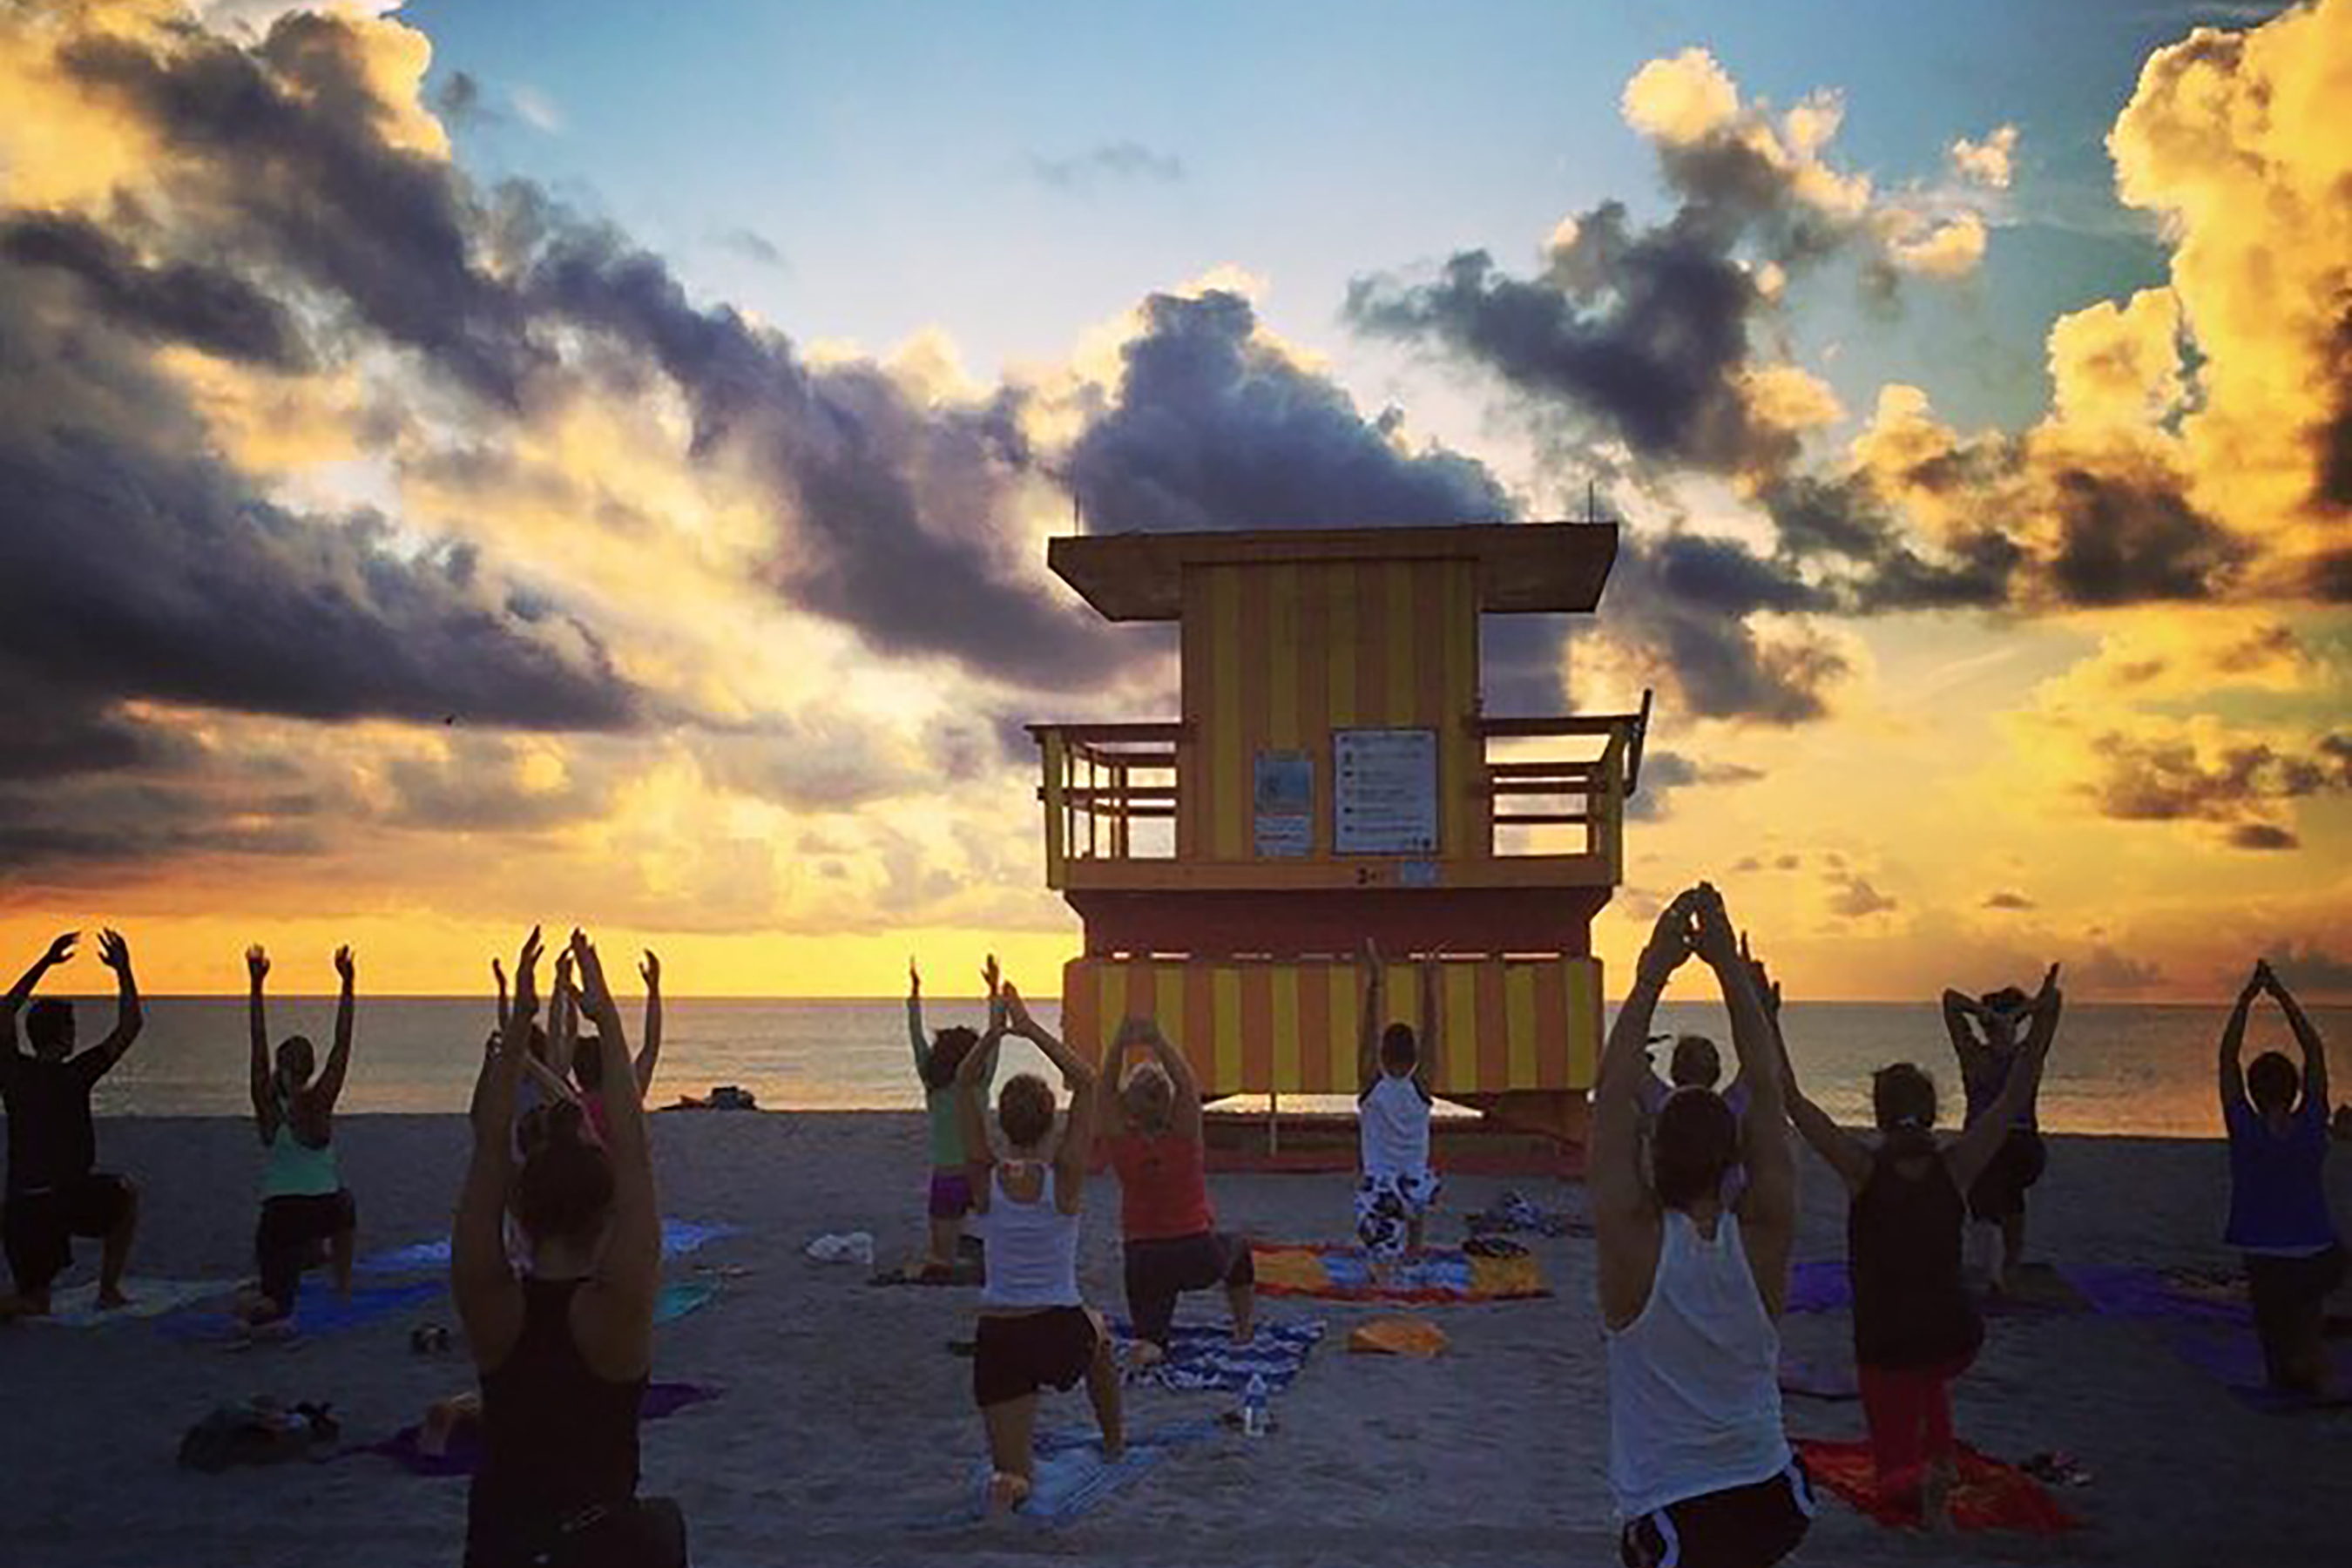 Discover a new morning routine that can help strengthen, detox, and exhilarate the body and mind at 3rd Street Beach Yoga